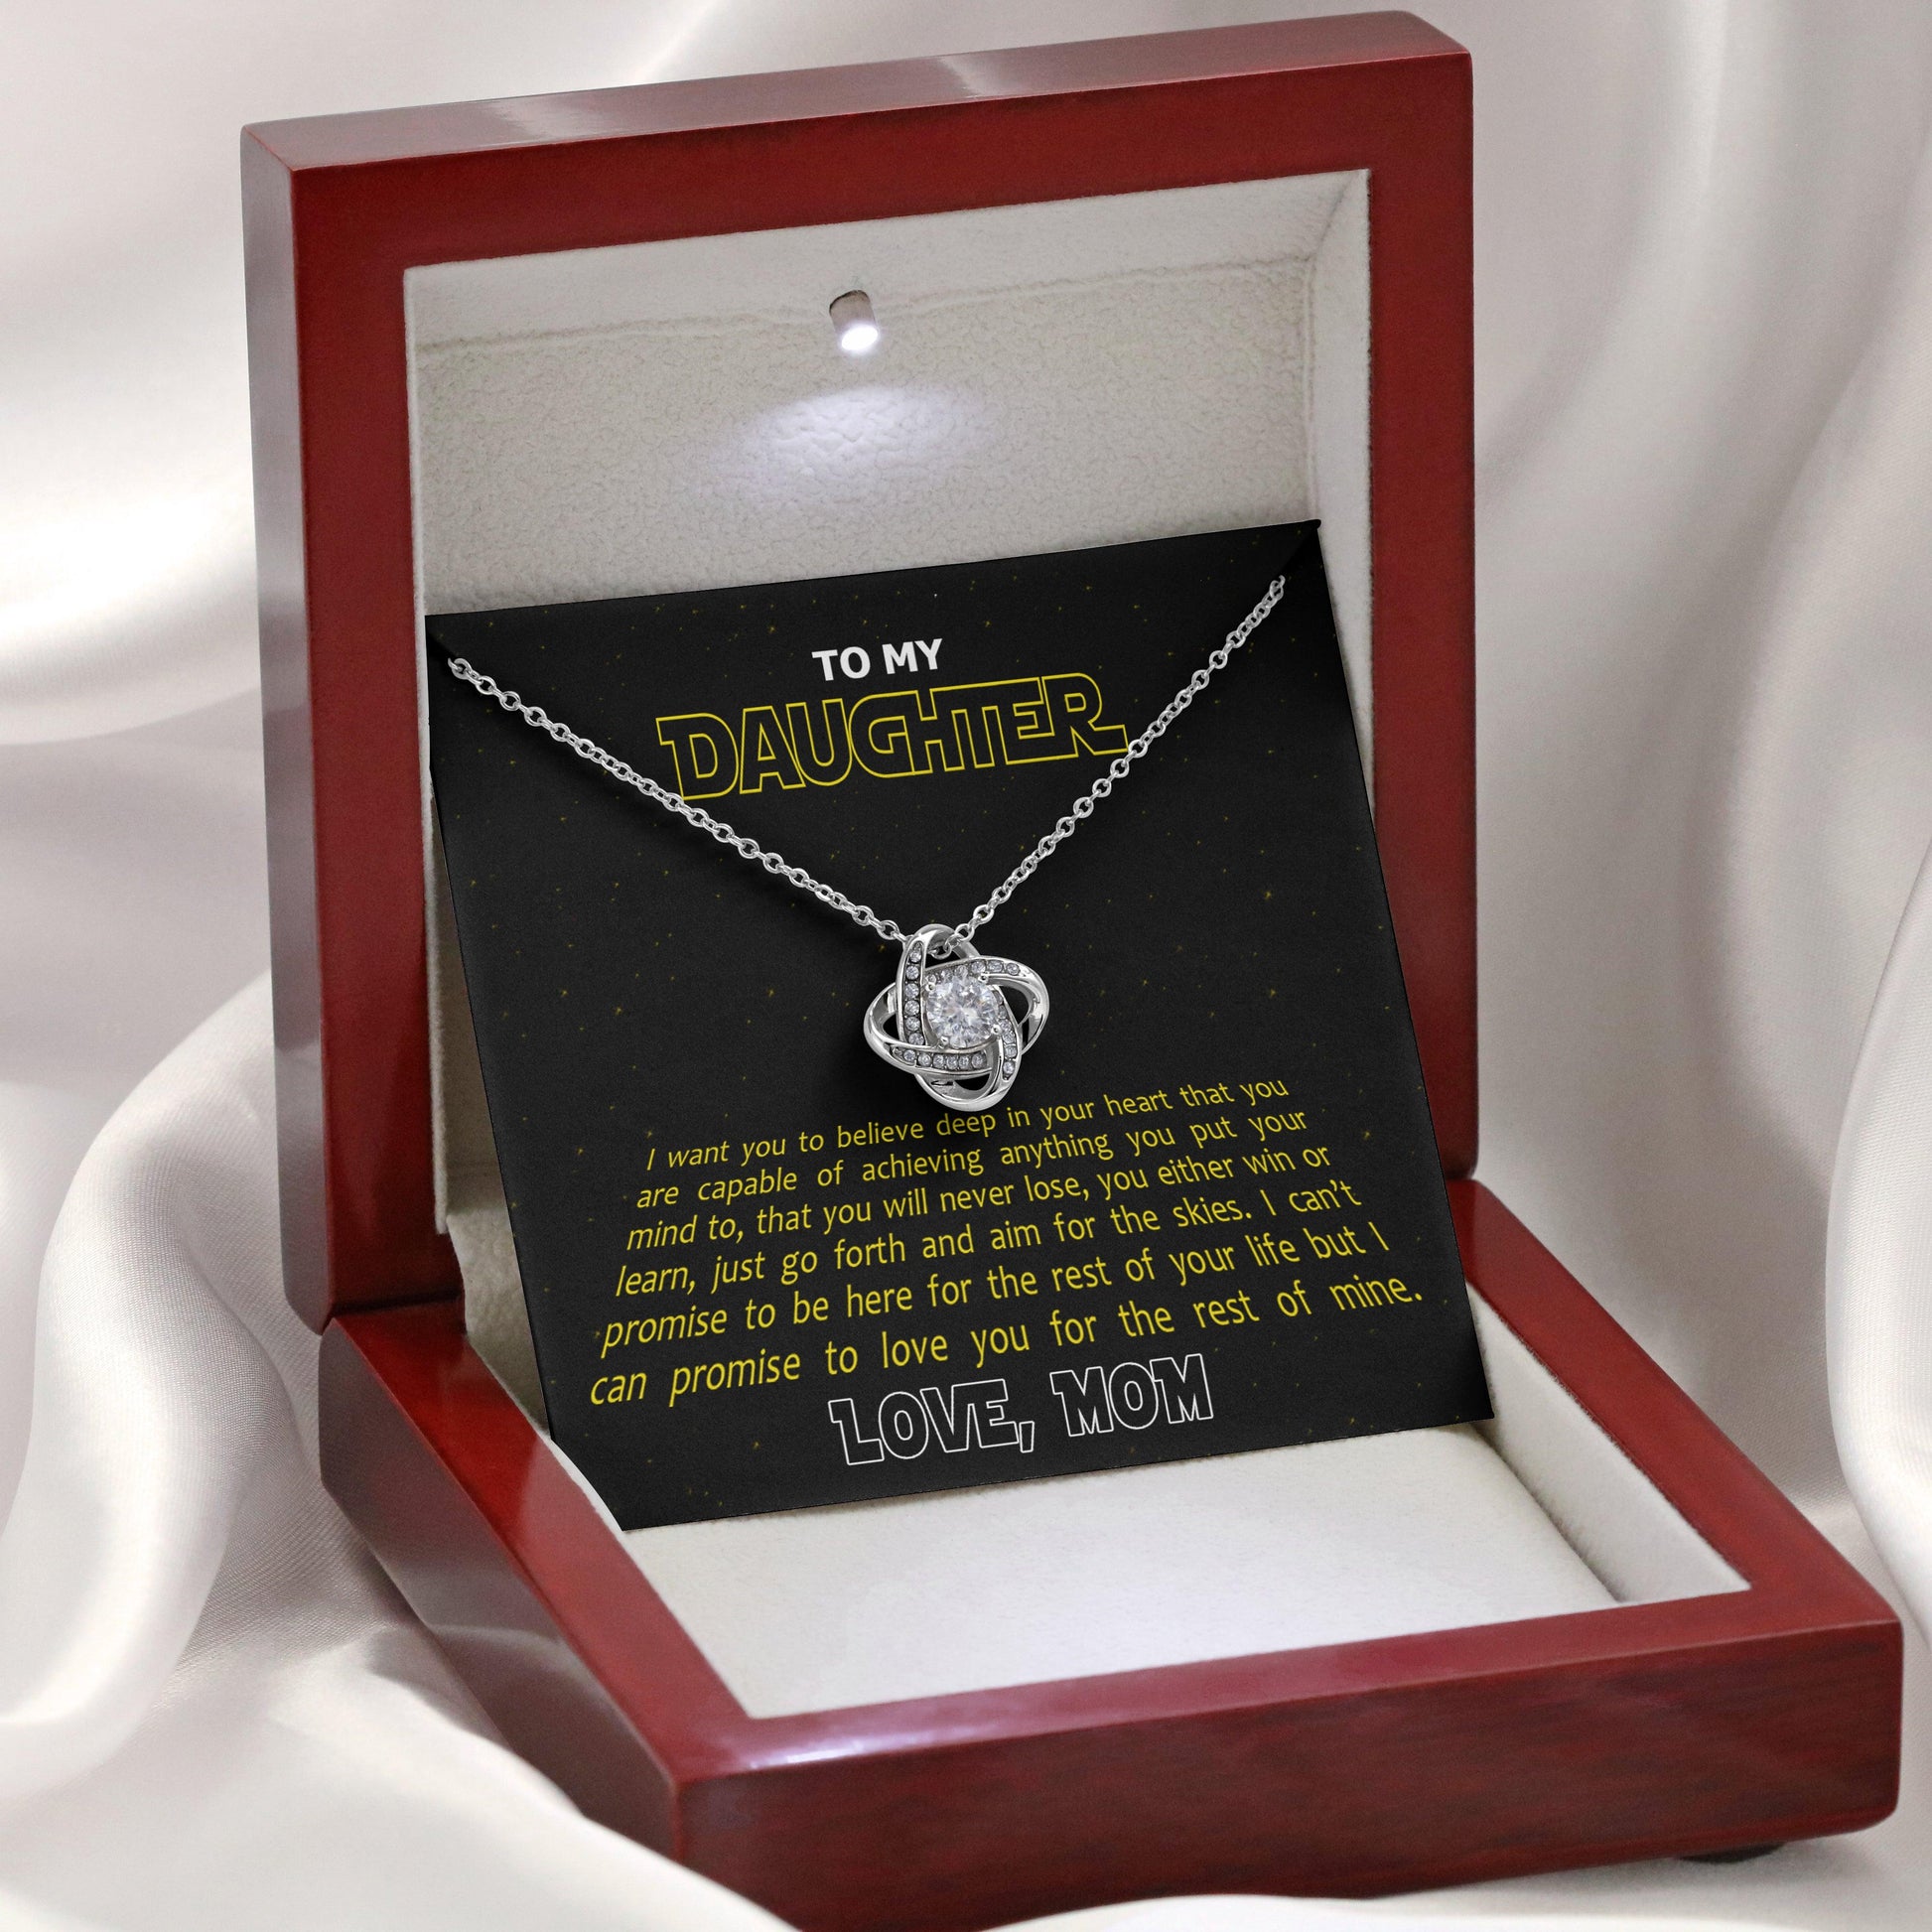 Jewelry gifts Daughter - My Universe - Necklace - Belesmé - Memorable Jewelry Gifts